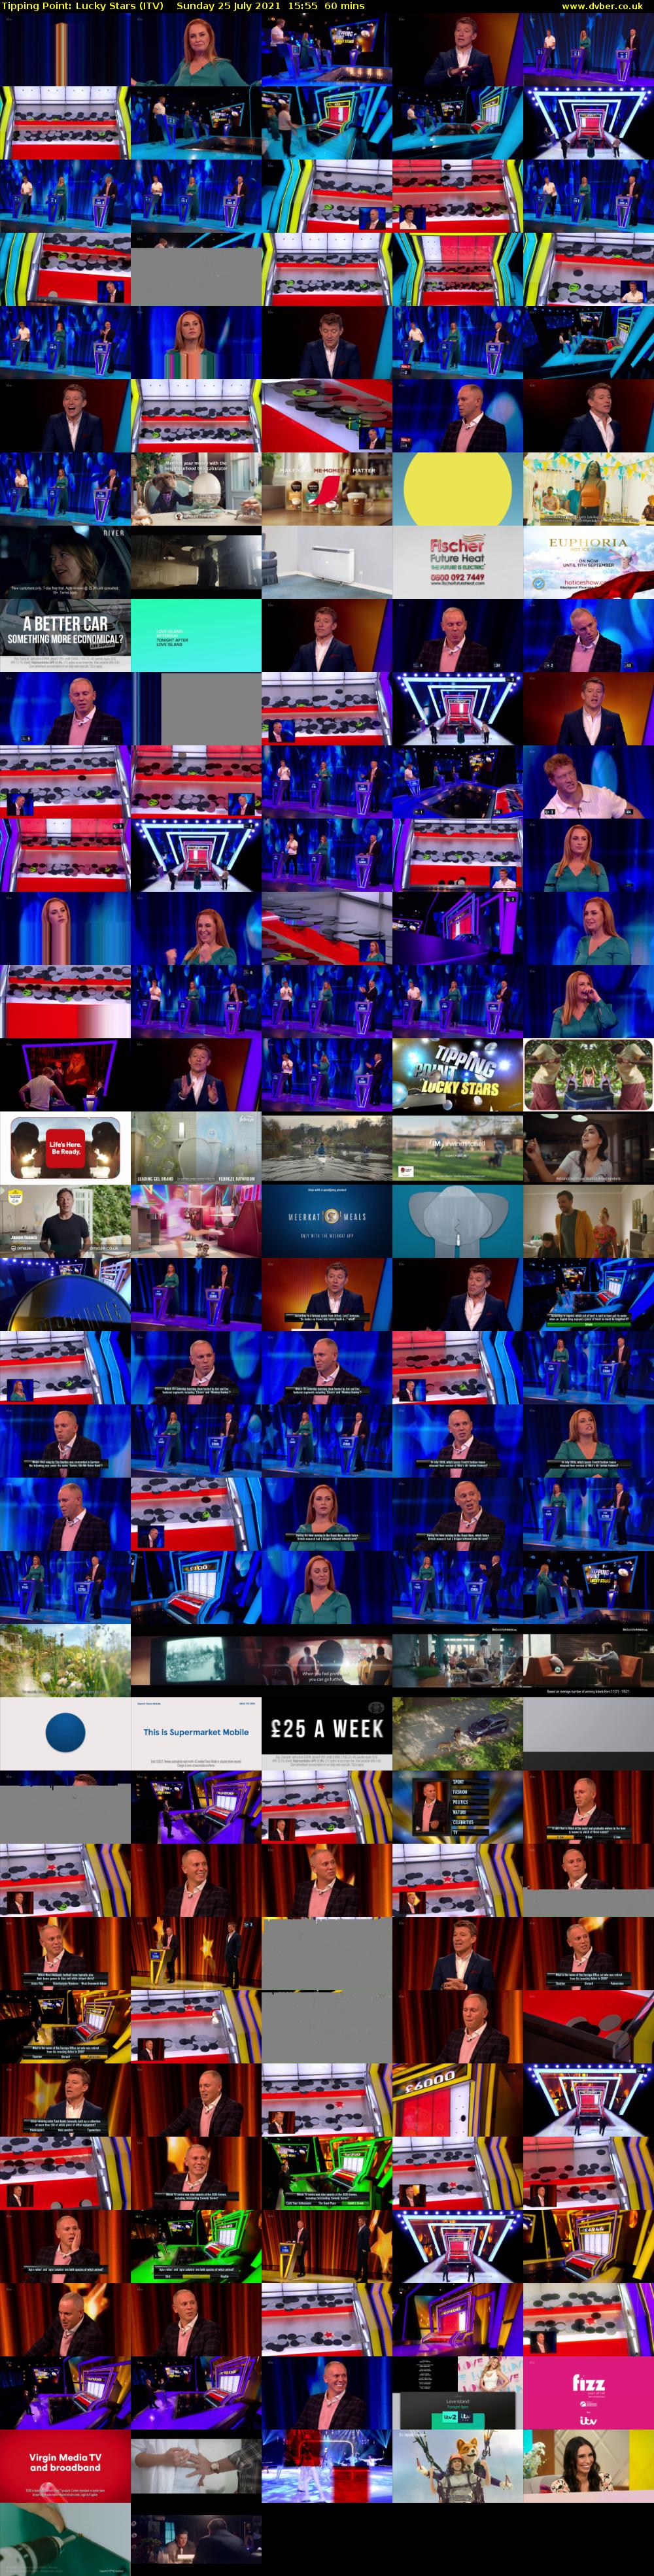 Tipping Point: Lucky Stars (ITV) Sunday 25 July 2021 15:55 - 16:55